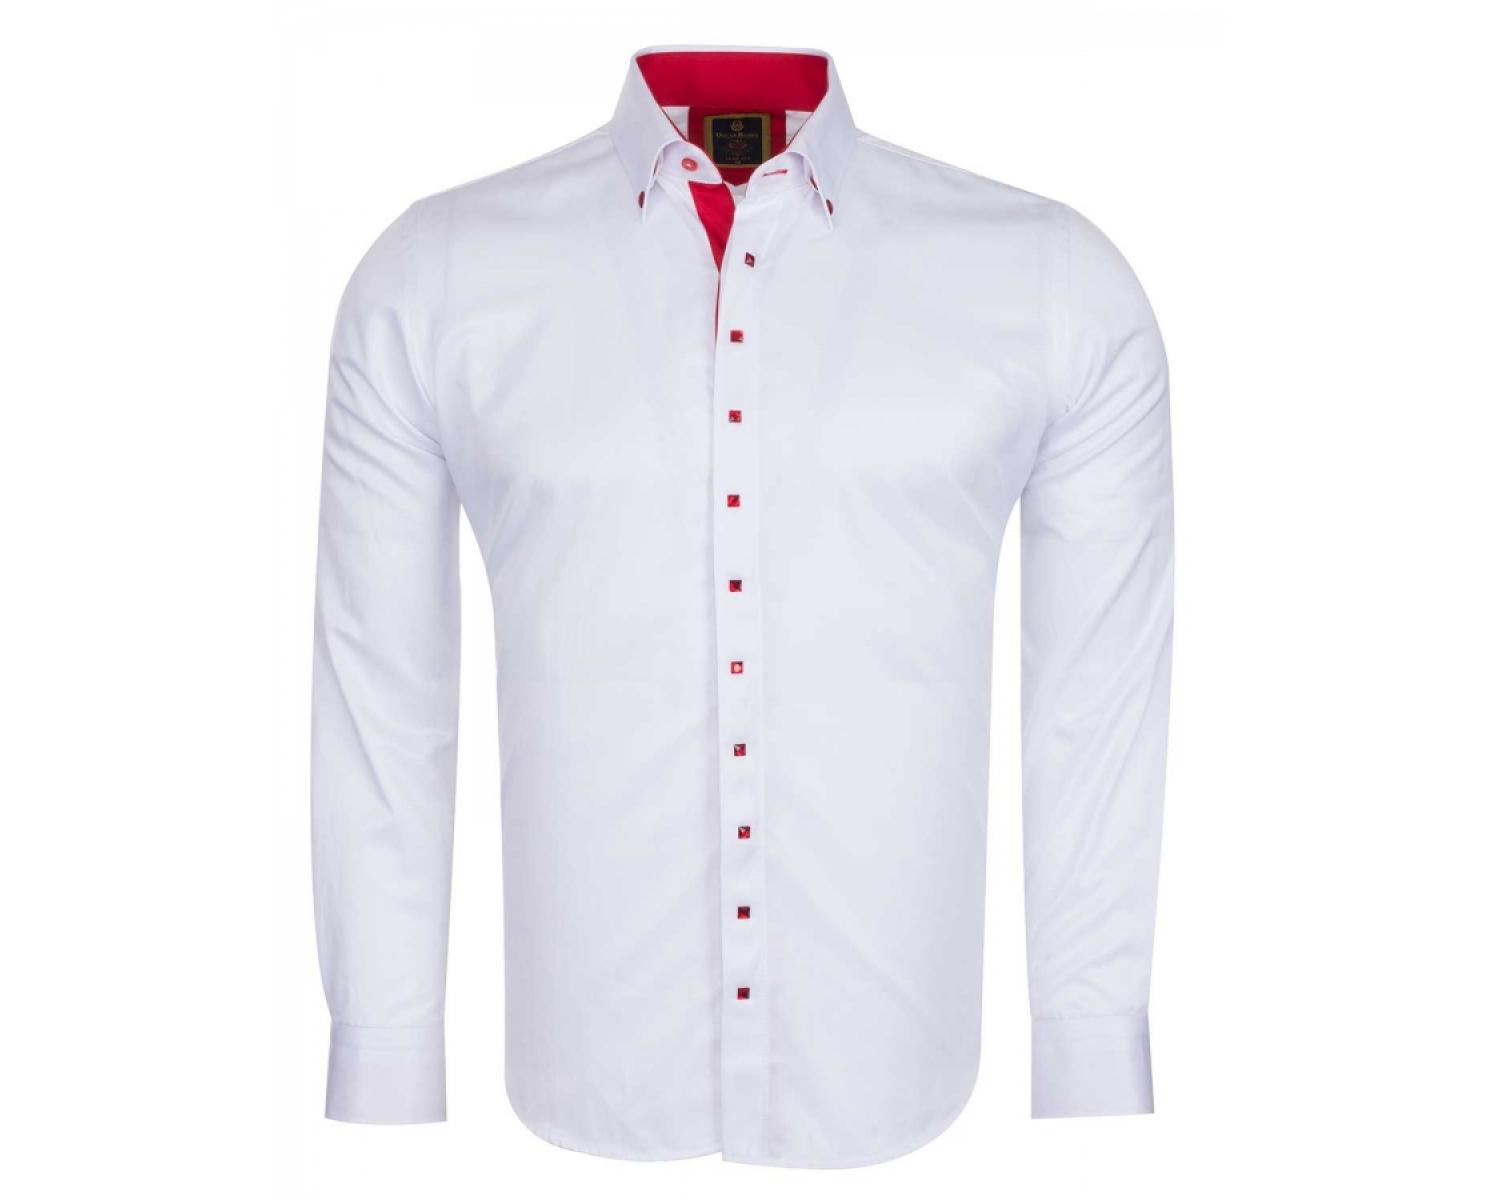 SL 5961 Men's white shirt with red details - Quality Designed Shirts